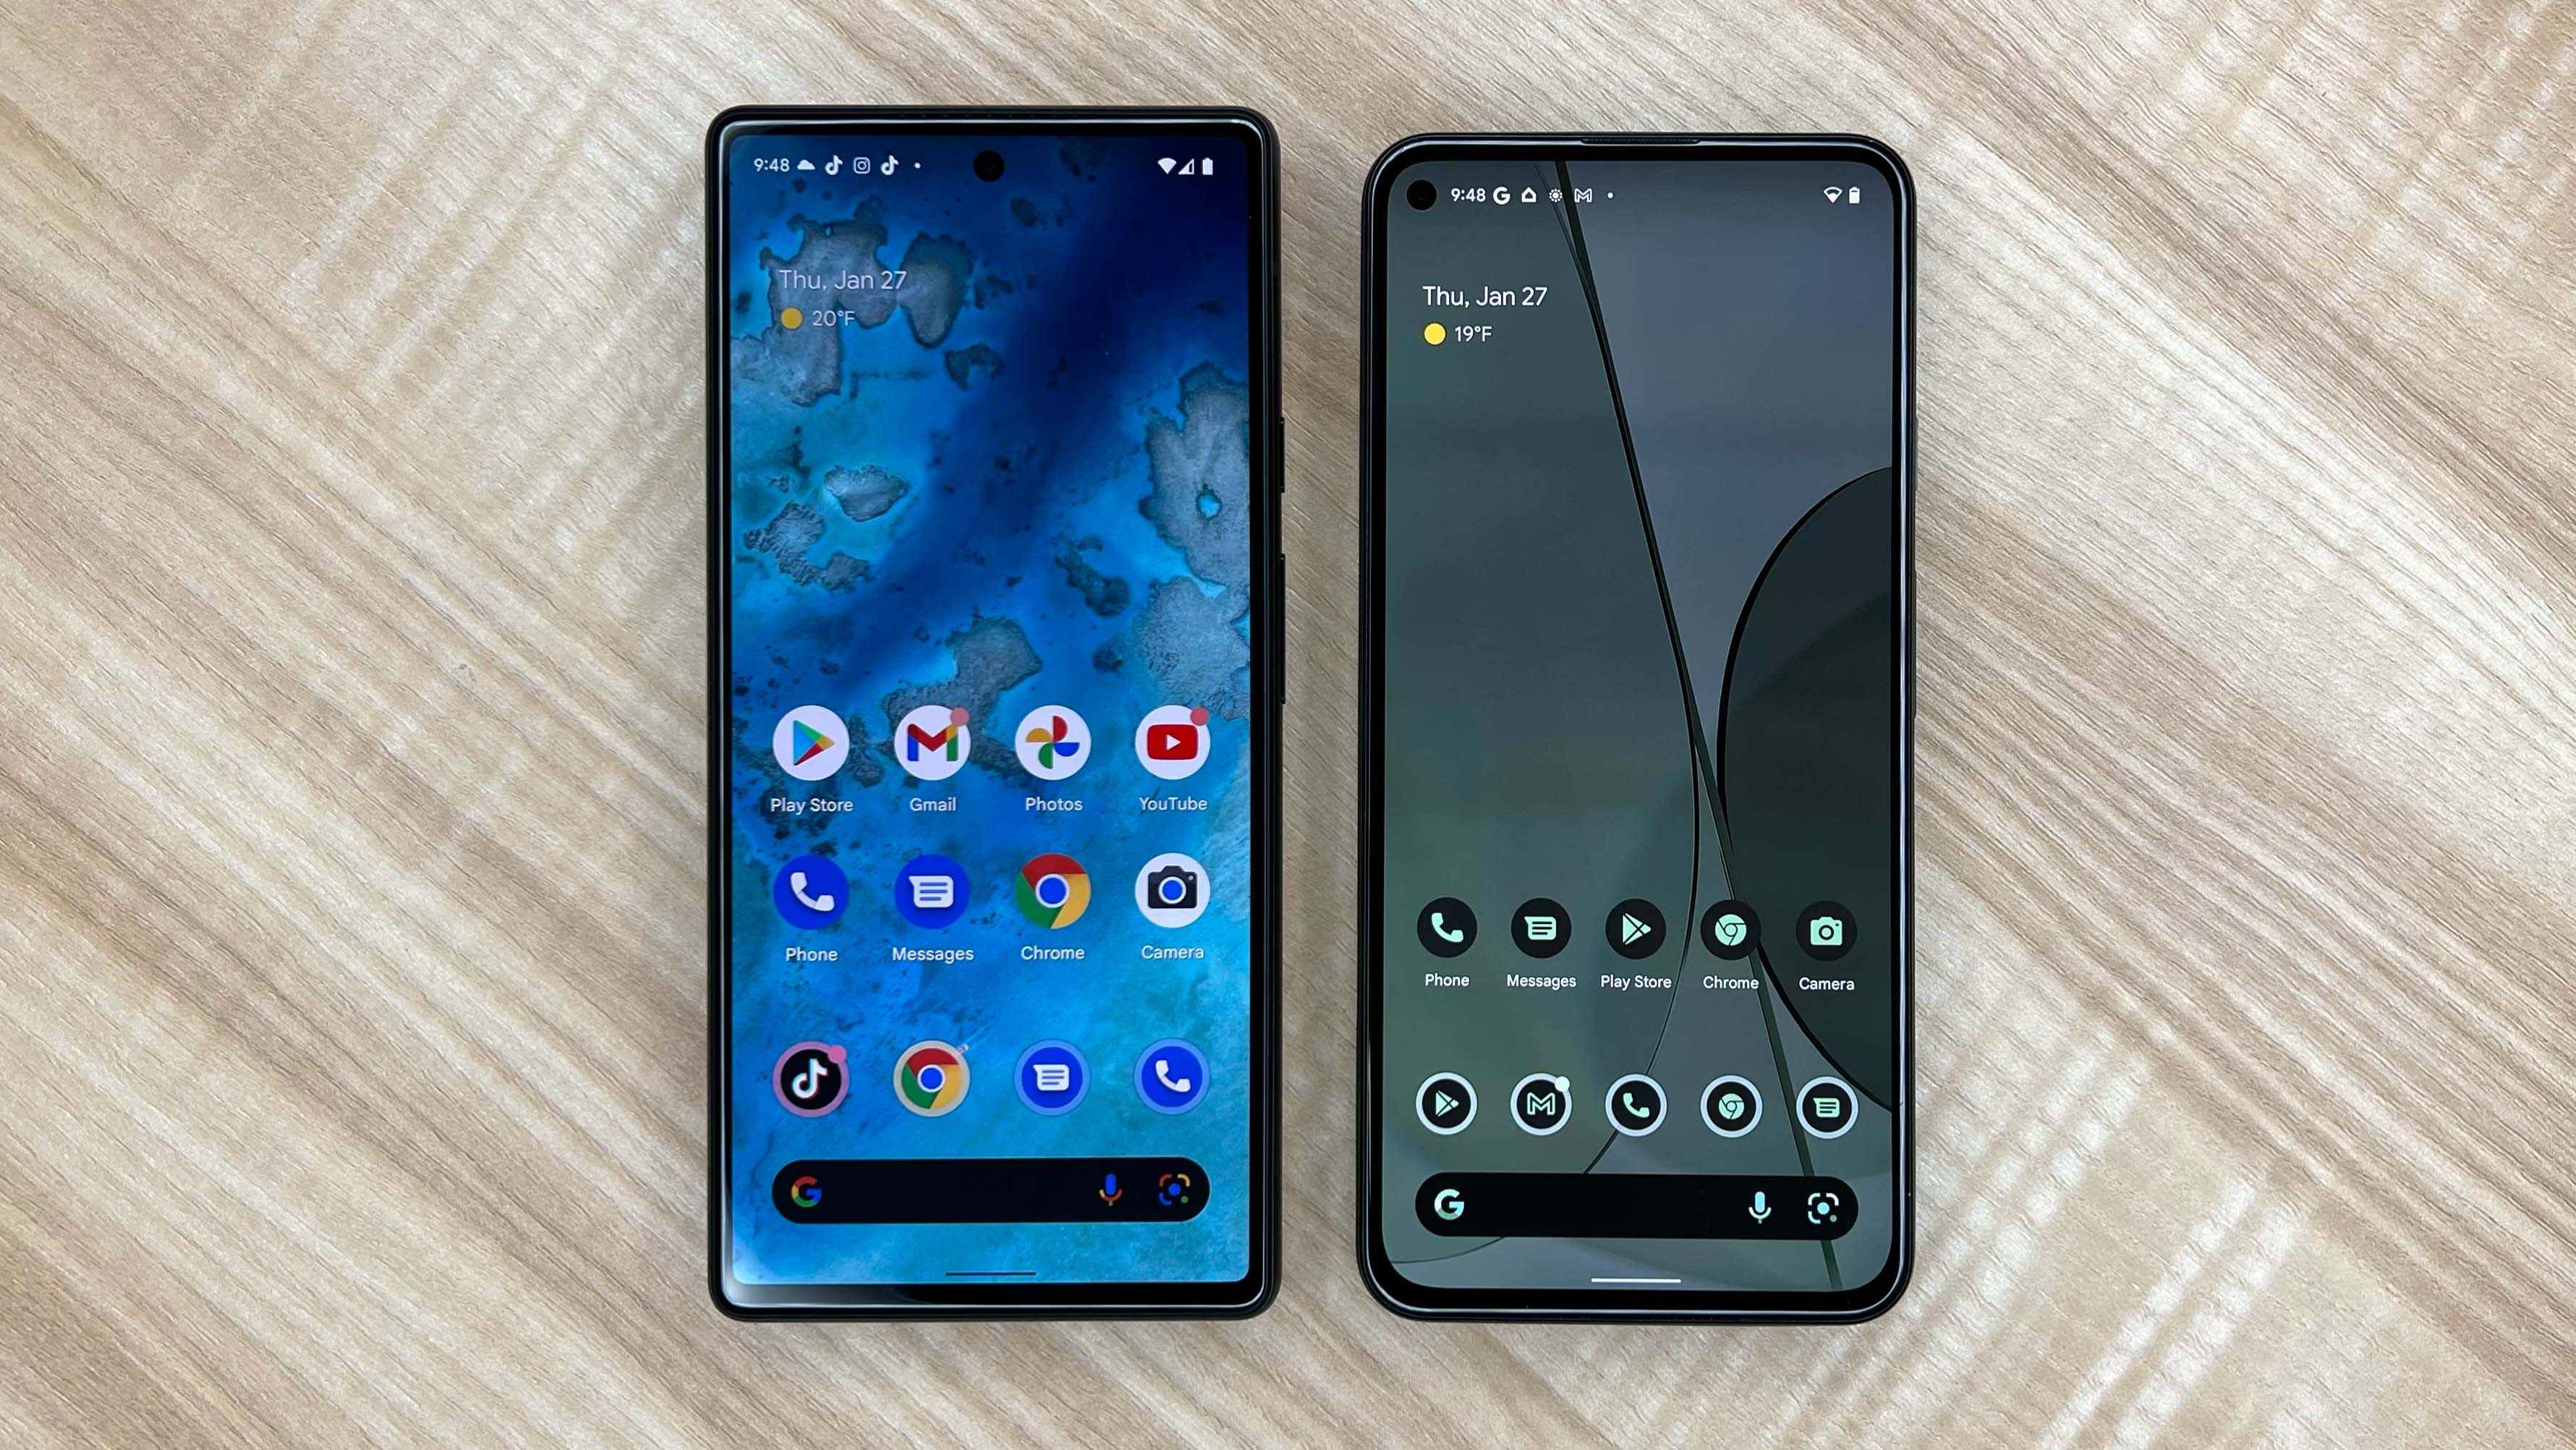 Google Pixel 6 vs Pixel 5: What's the difference and should you